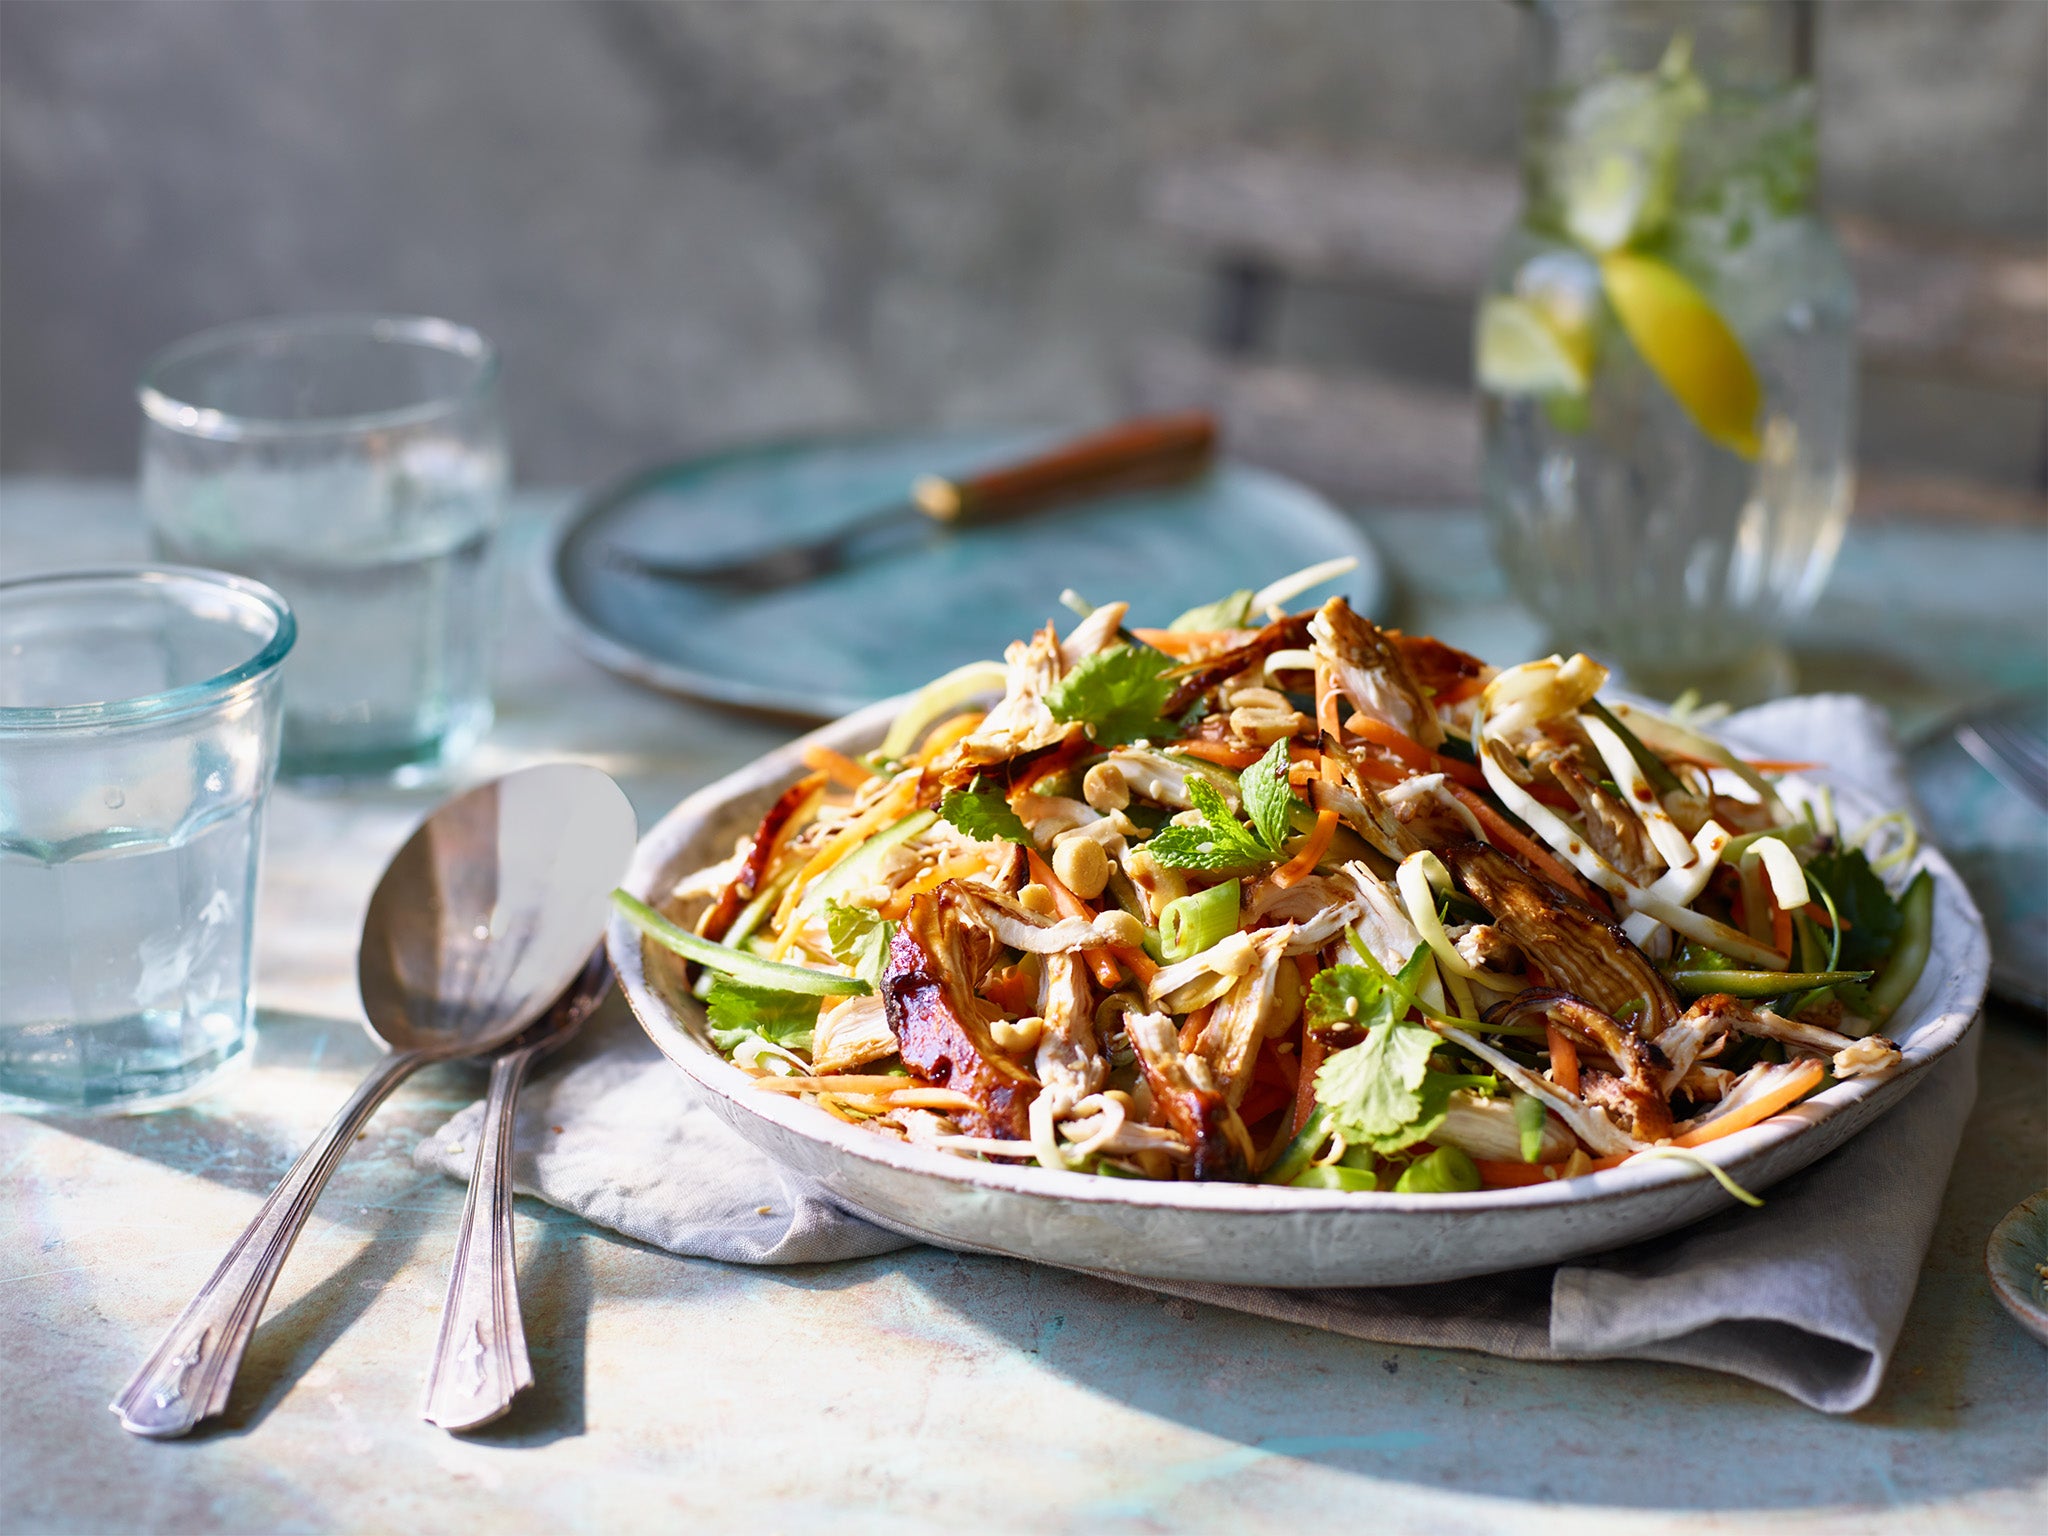 food, salad recipes, summer recipes, salad, tiktok, opt for chopped: fresh new salad recipes to brighten up mealtimes this summer